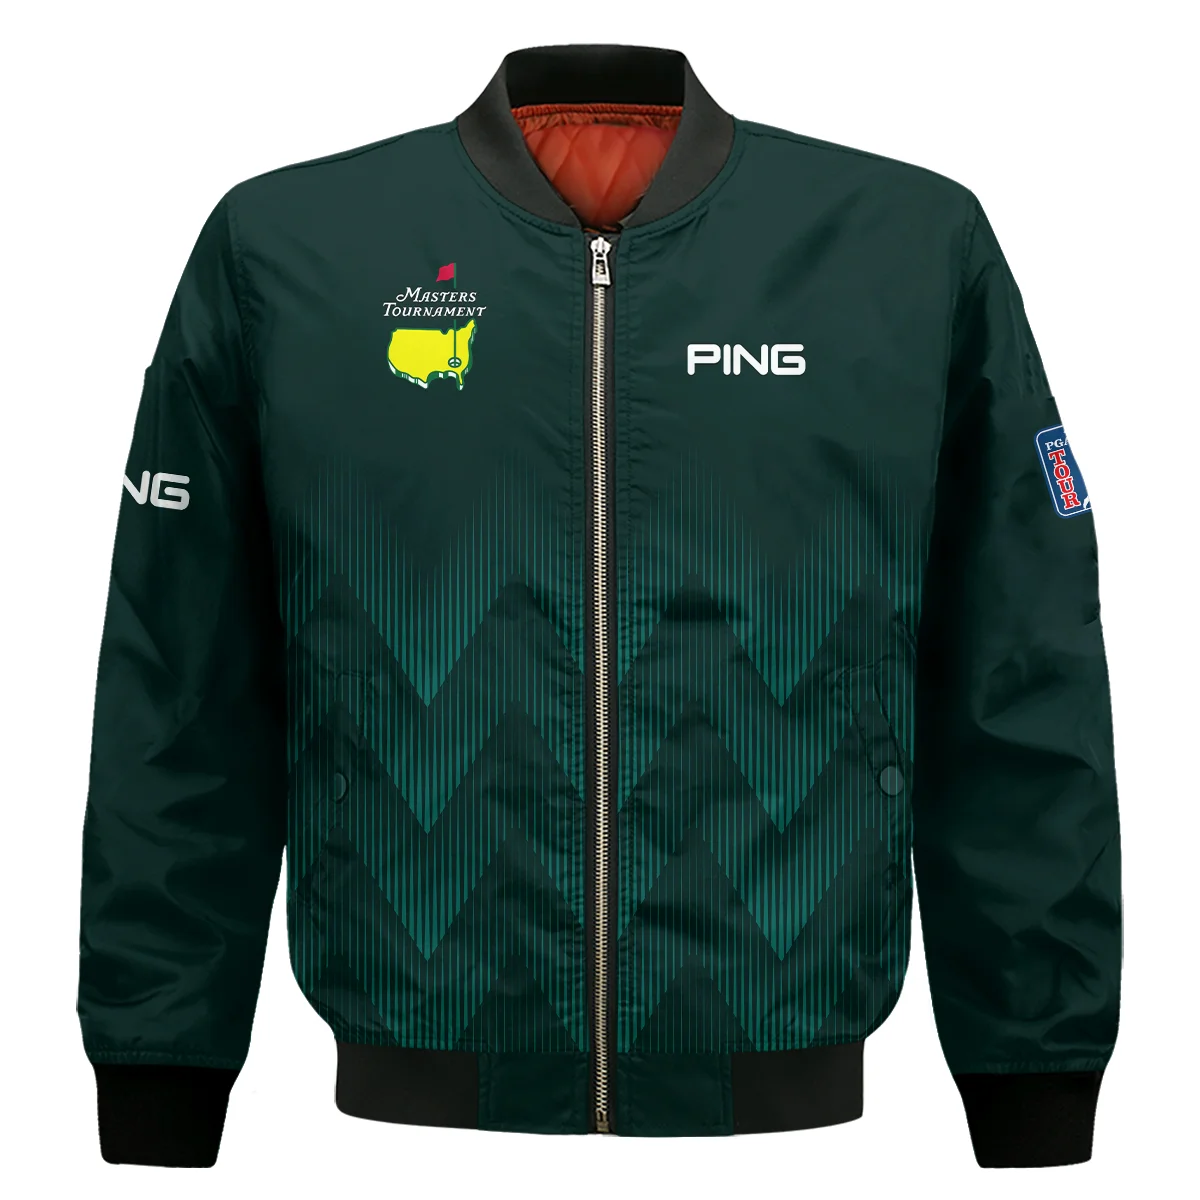 Masters Tournament Golf Ping Bomber Jacket Zigzag Pattern Dark Green Golf Sports All Over Print Bomber Jacket